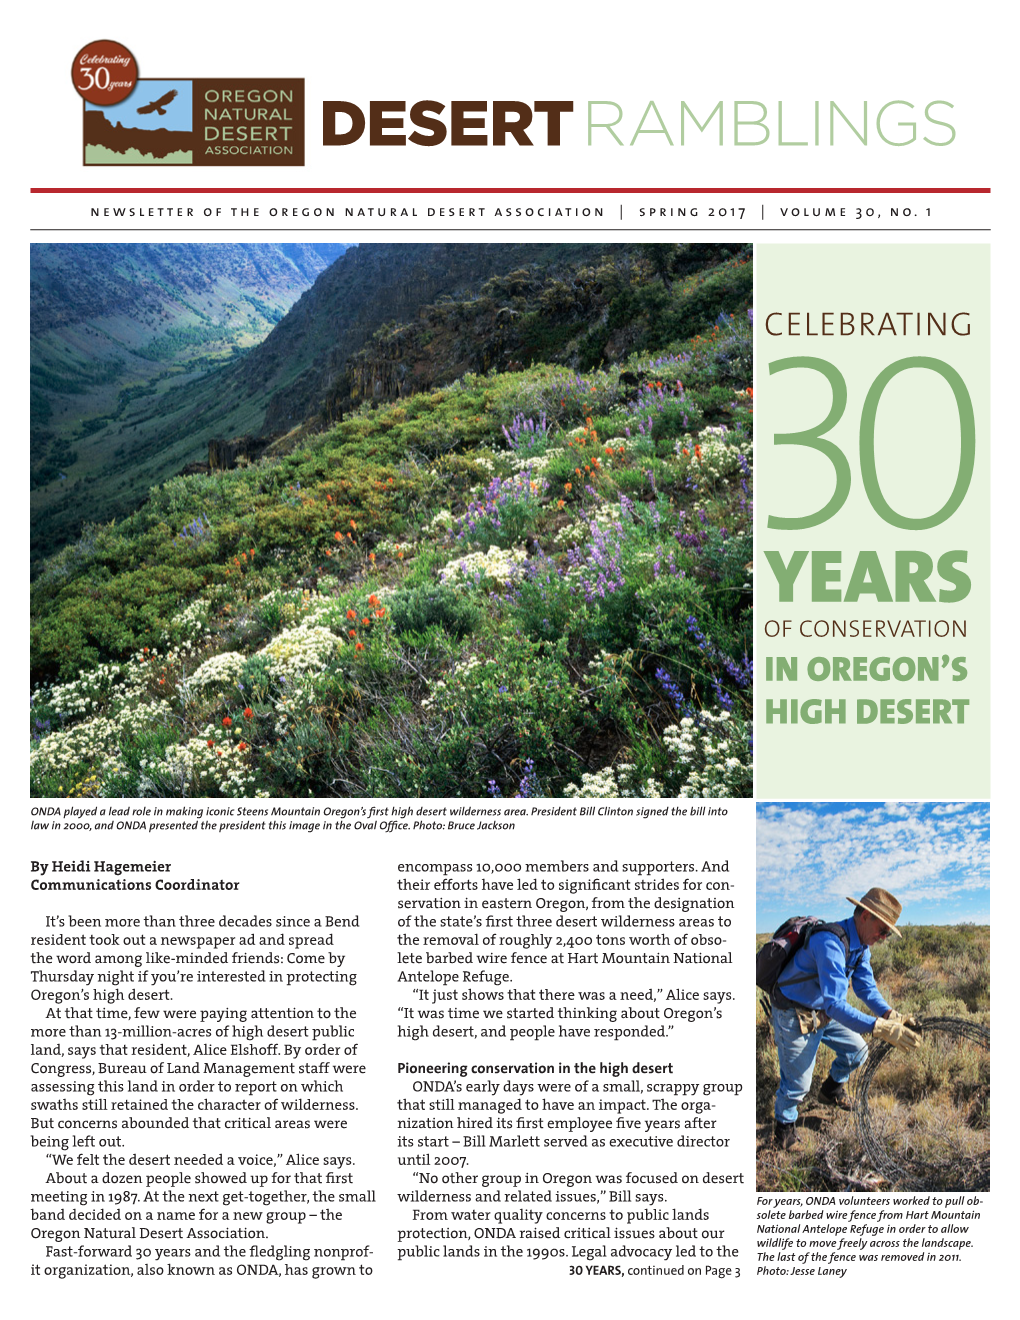 Updates to Oregon Desert Trail Resources Following a Successful 2016 Season, Oregon Execute Their Adventures Along the ODT